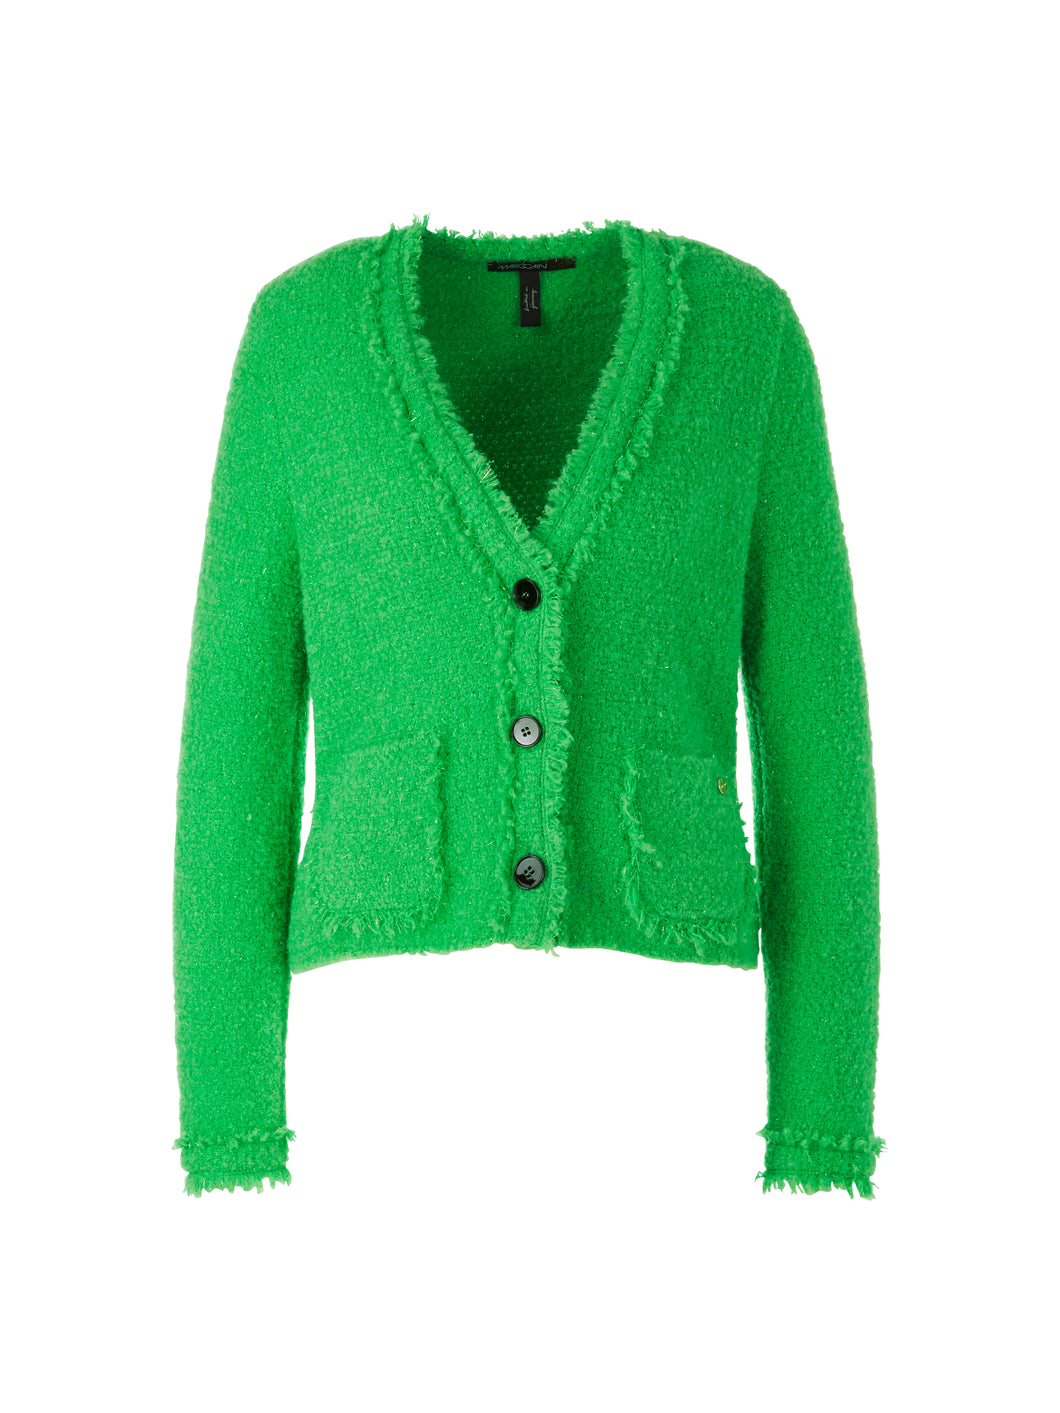 Marccain  Bouclé-Cardigan Knitted in Germany